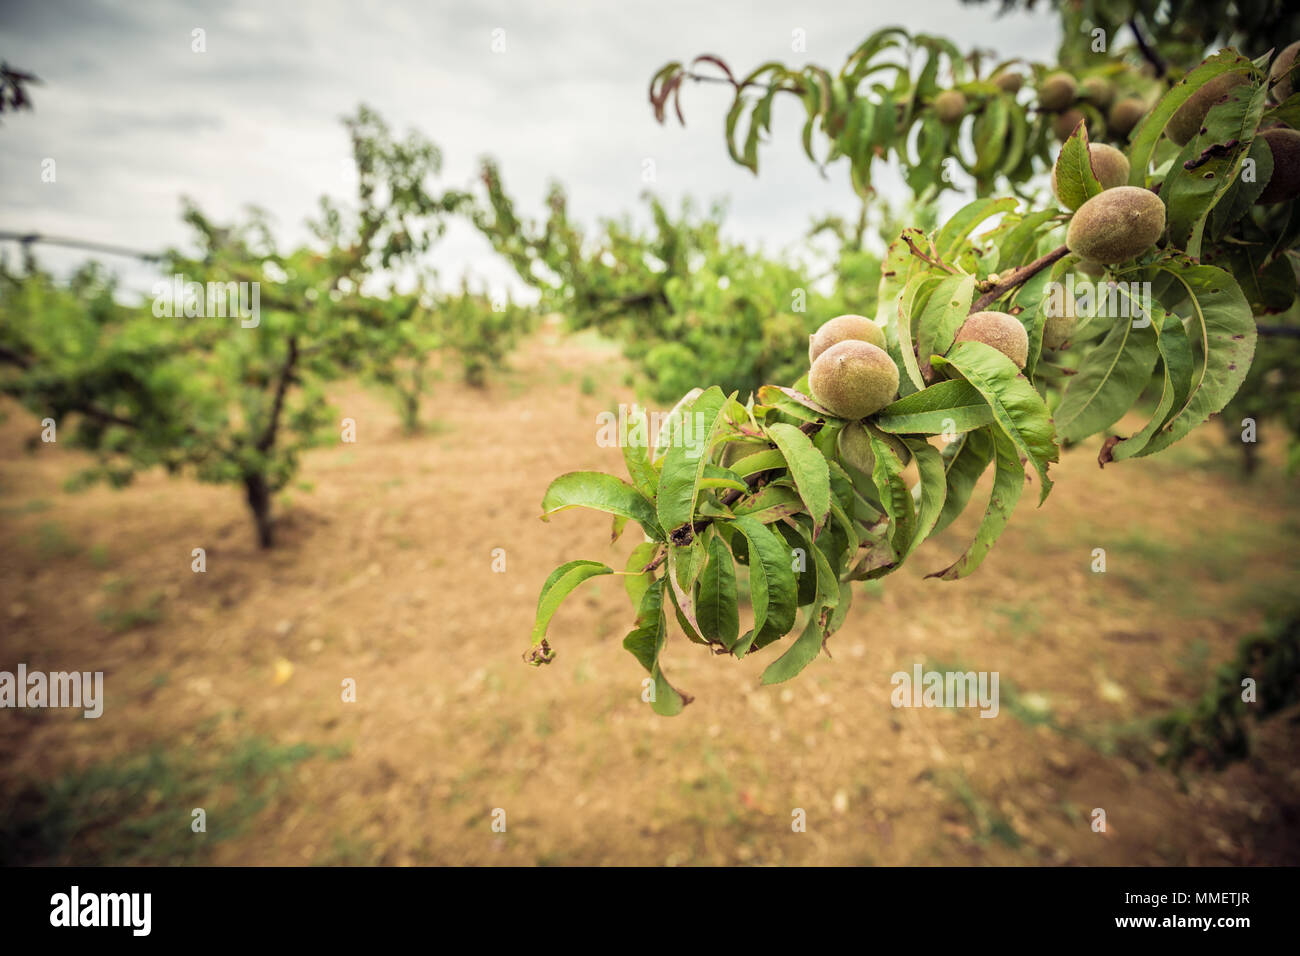 Close-up of a branch with unripe peaches. Peach orchard in the background. Fruit farming Stock Photo